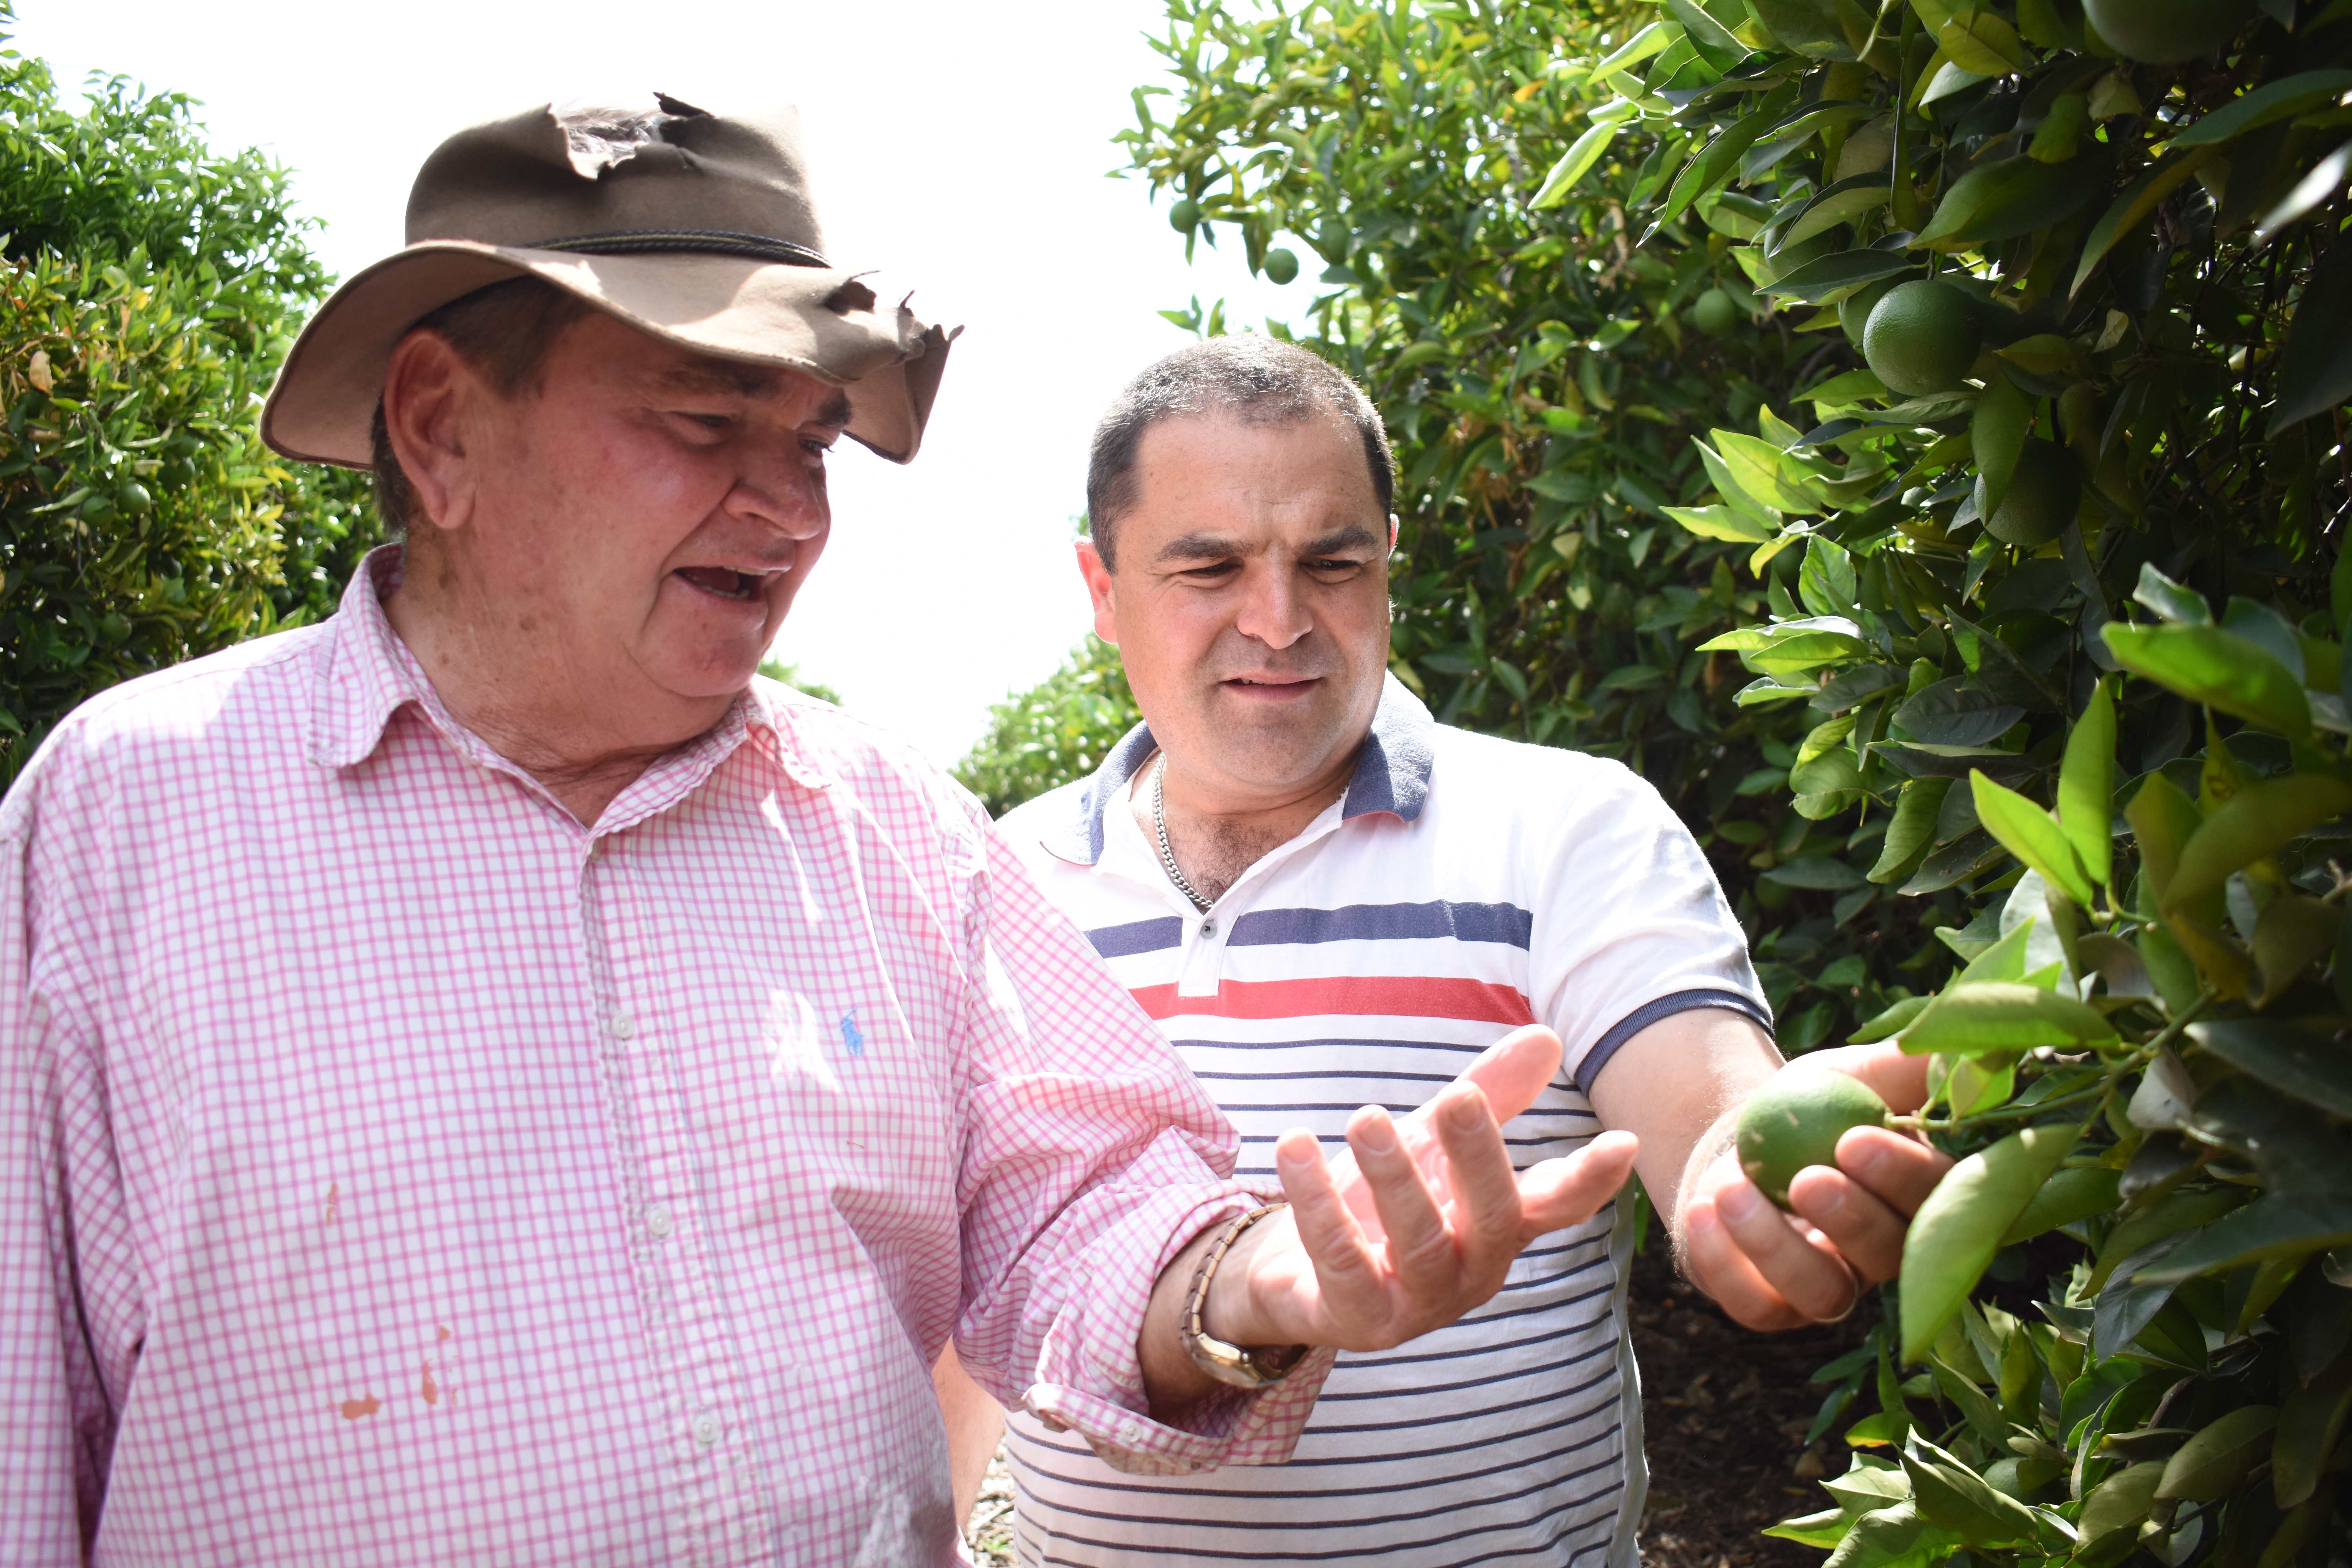 RELIEF FOR GROWERS IN THE RIVERLAND THIS SUMMER